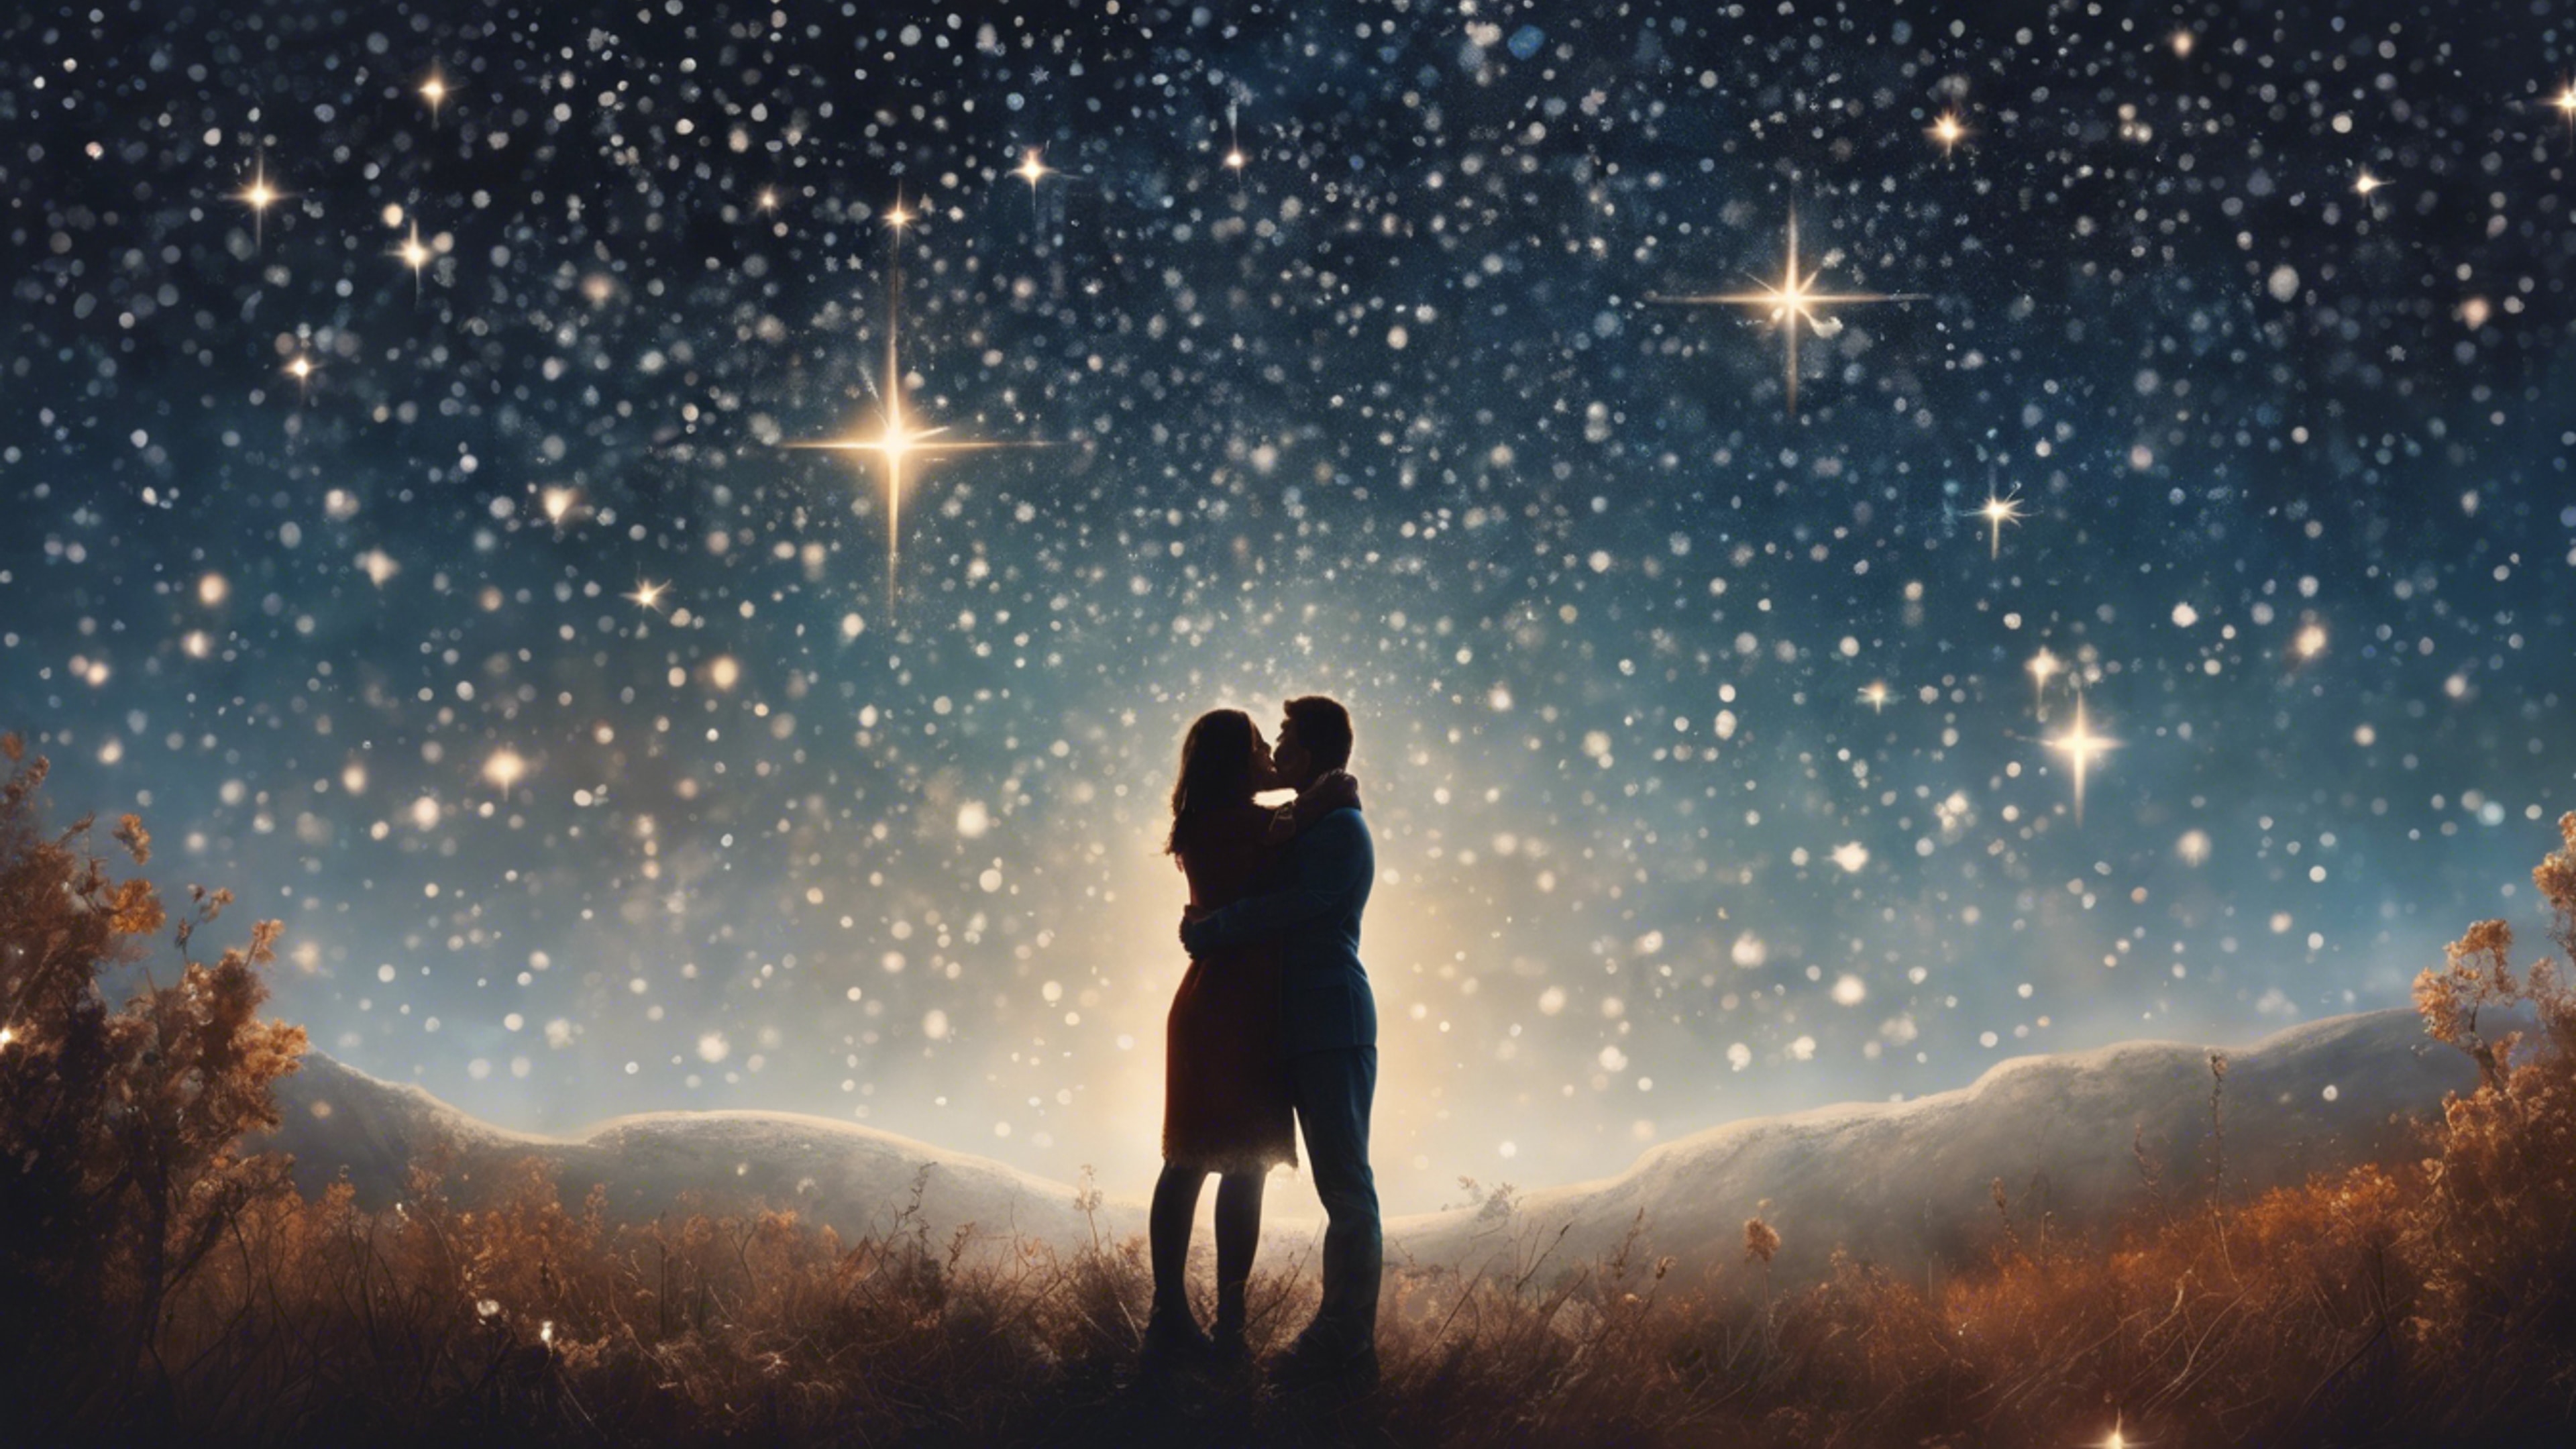 A timeless painting of a couple sharing a romantic moment under a star-filled sky. Tapeta na zeď[26fb6f637c3e4c759c8d]